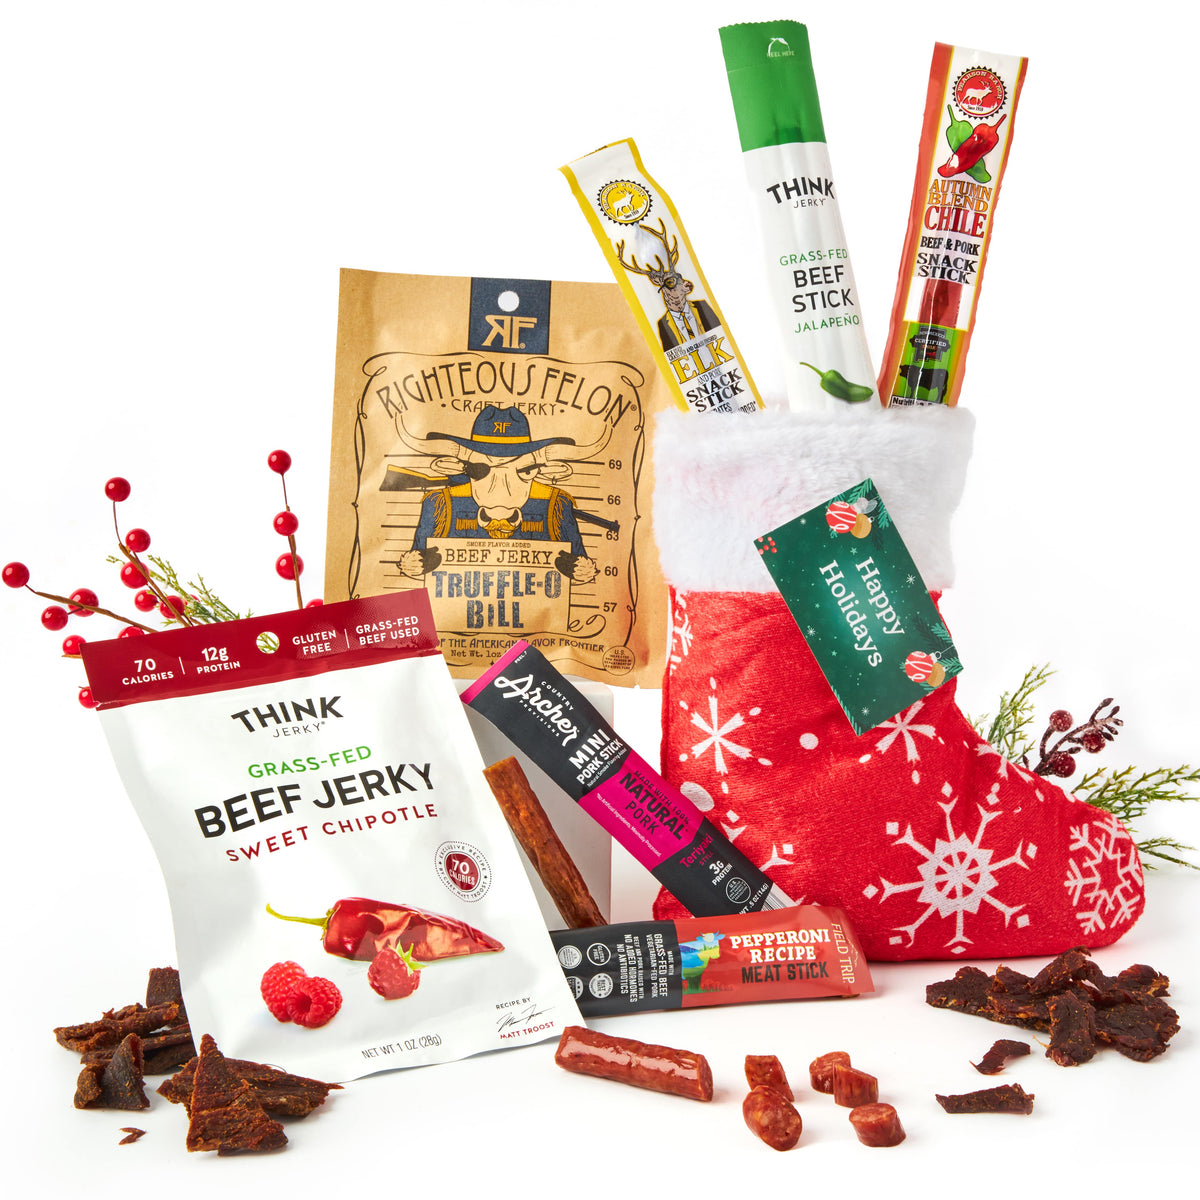  Jerky Stick Manly Man Gift Set, Filled with protein packed  Jerky Sticks & You're the Man Mug, Great Gift for Him, Gifts For Men Who  Have Everything : Grocery 